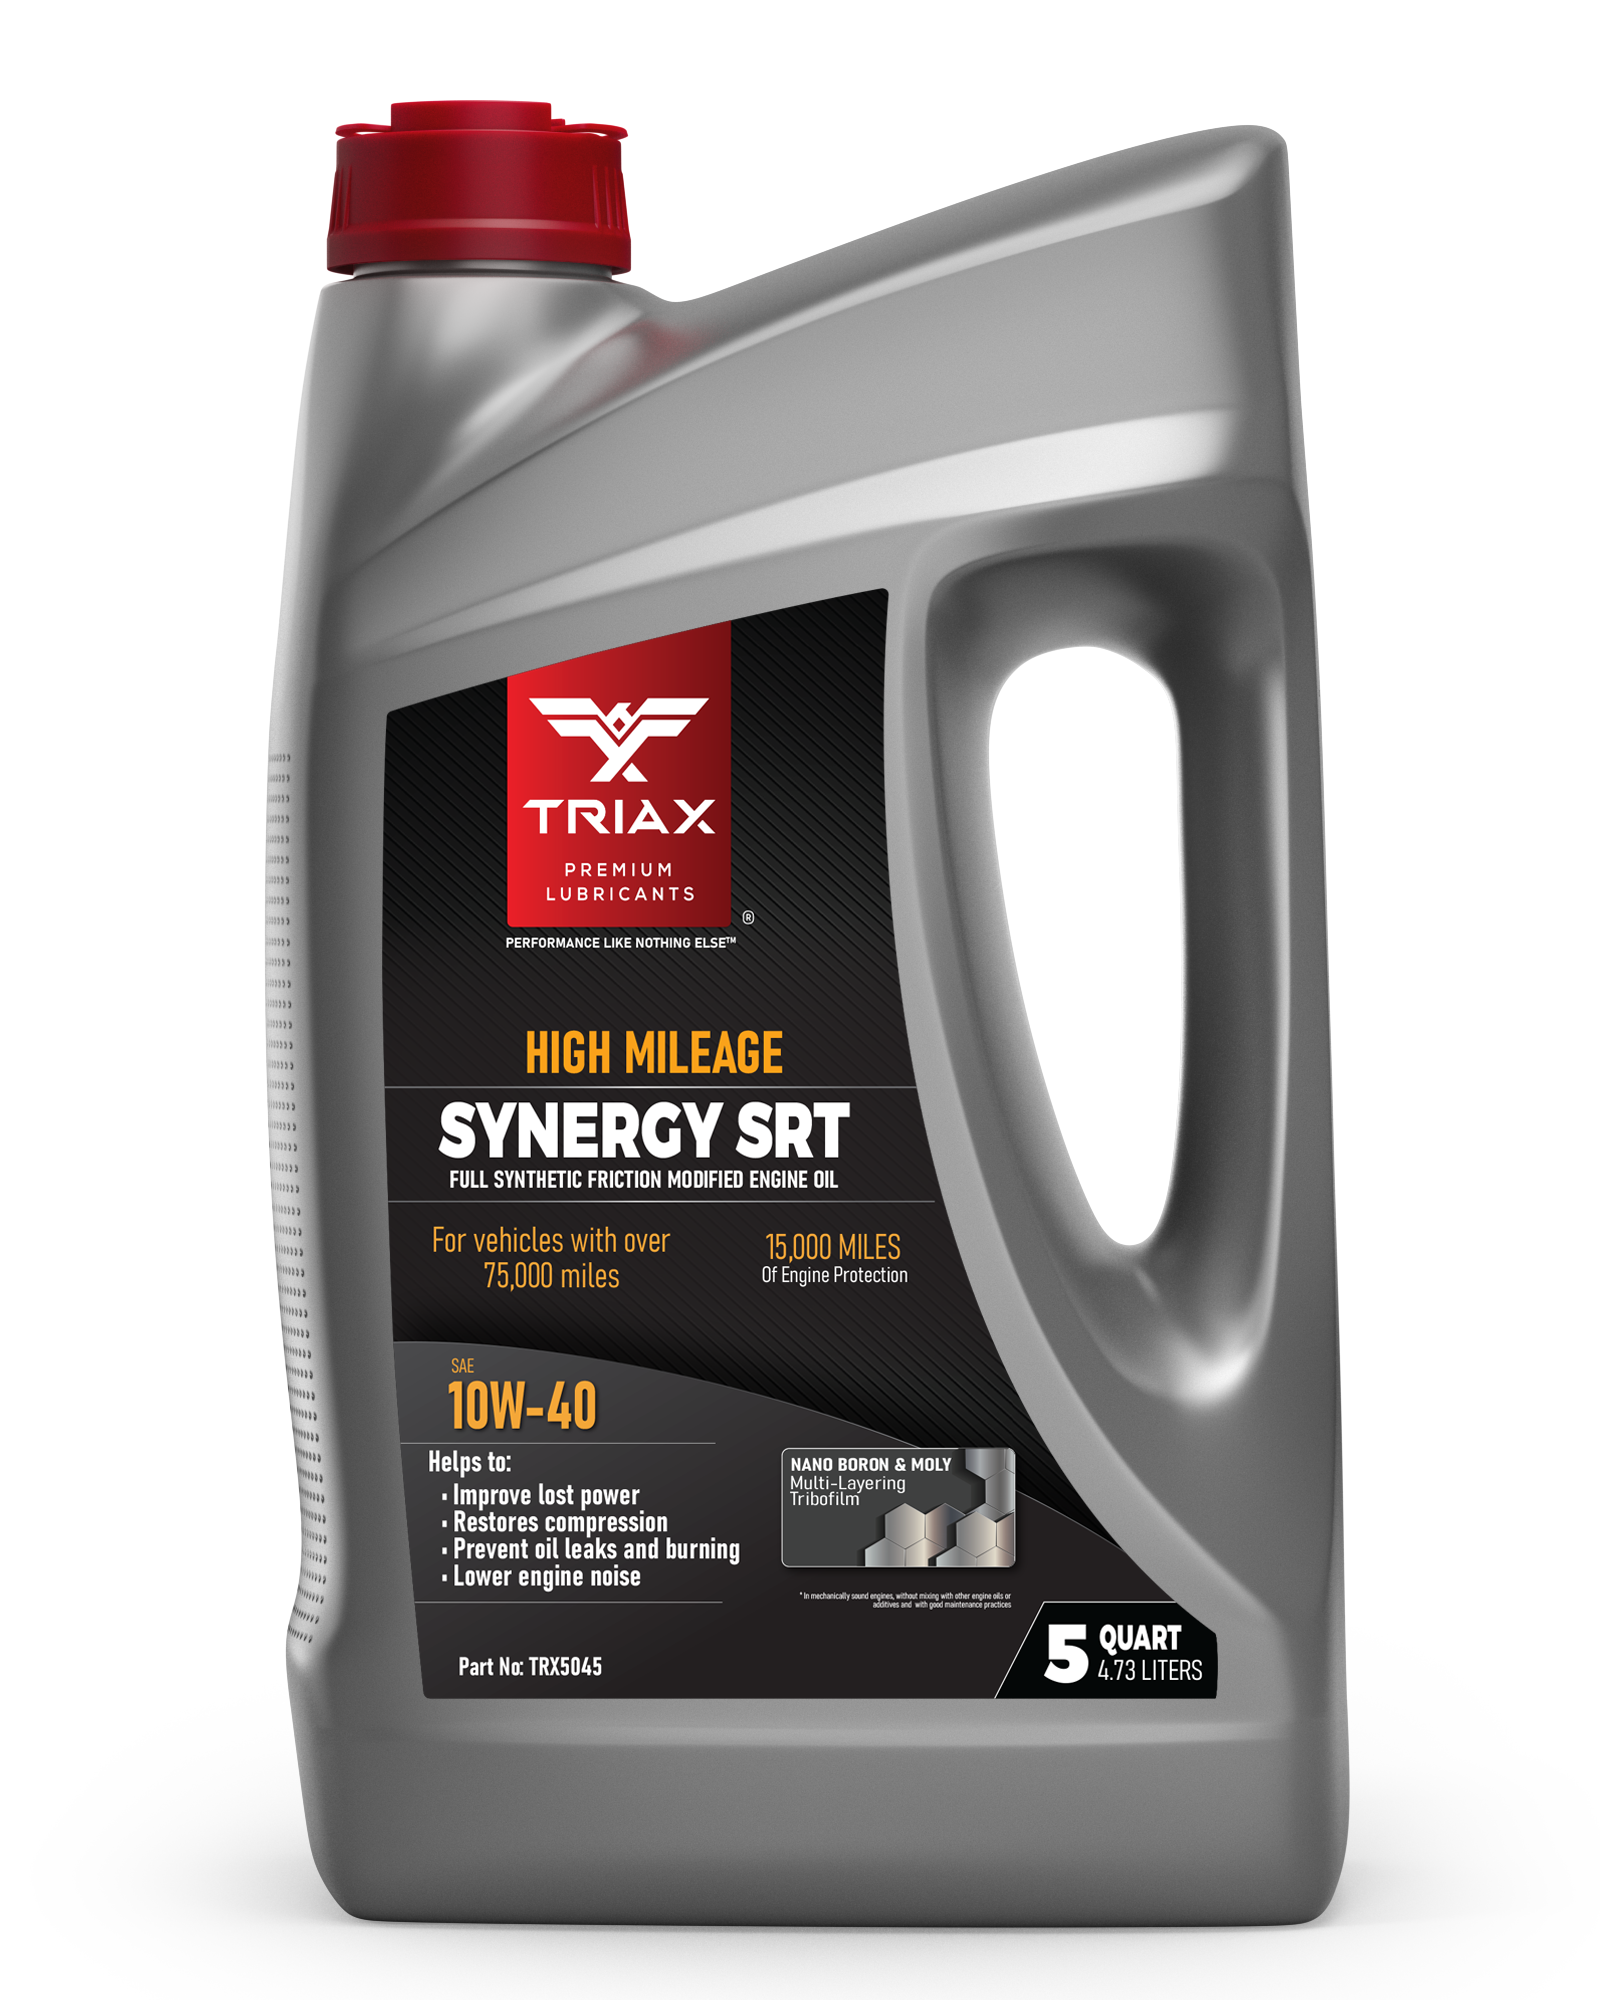 TRIAX Synergy SRT 10W-40 Full Synthetic High Mileage